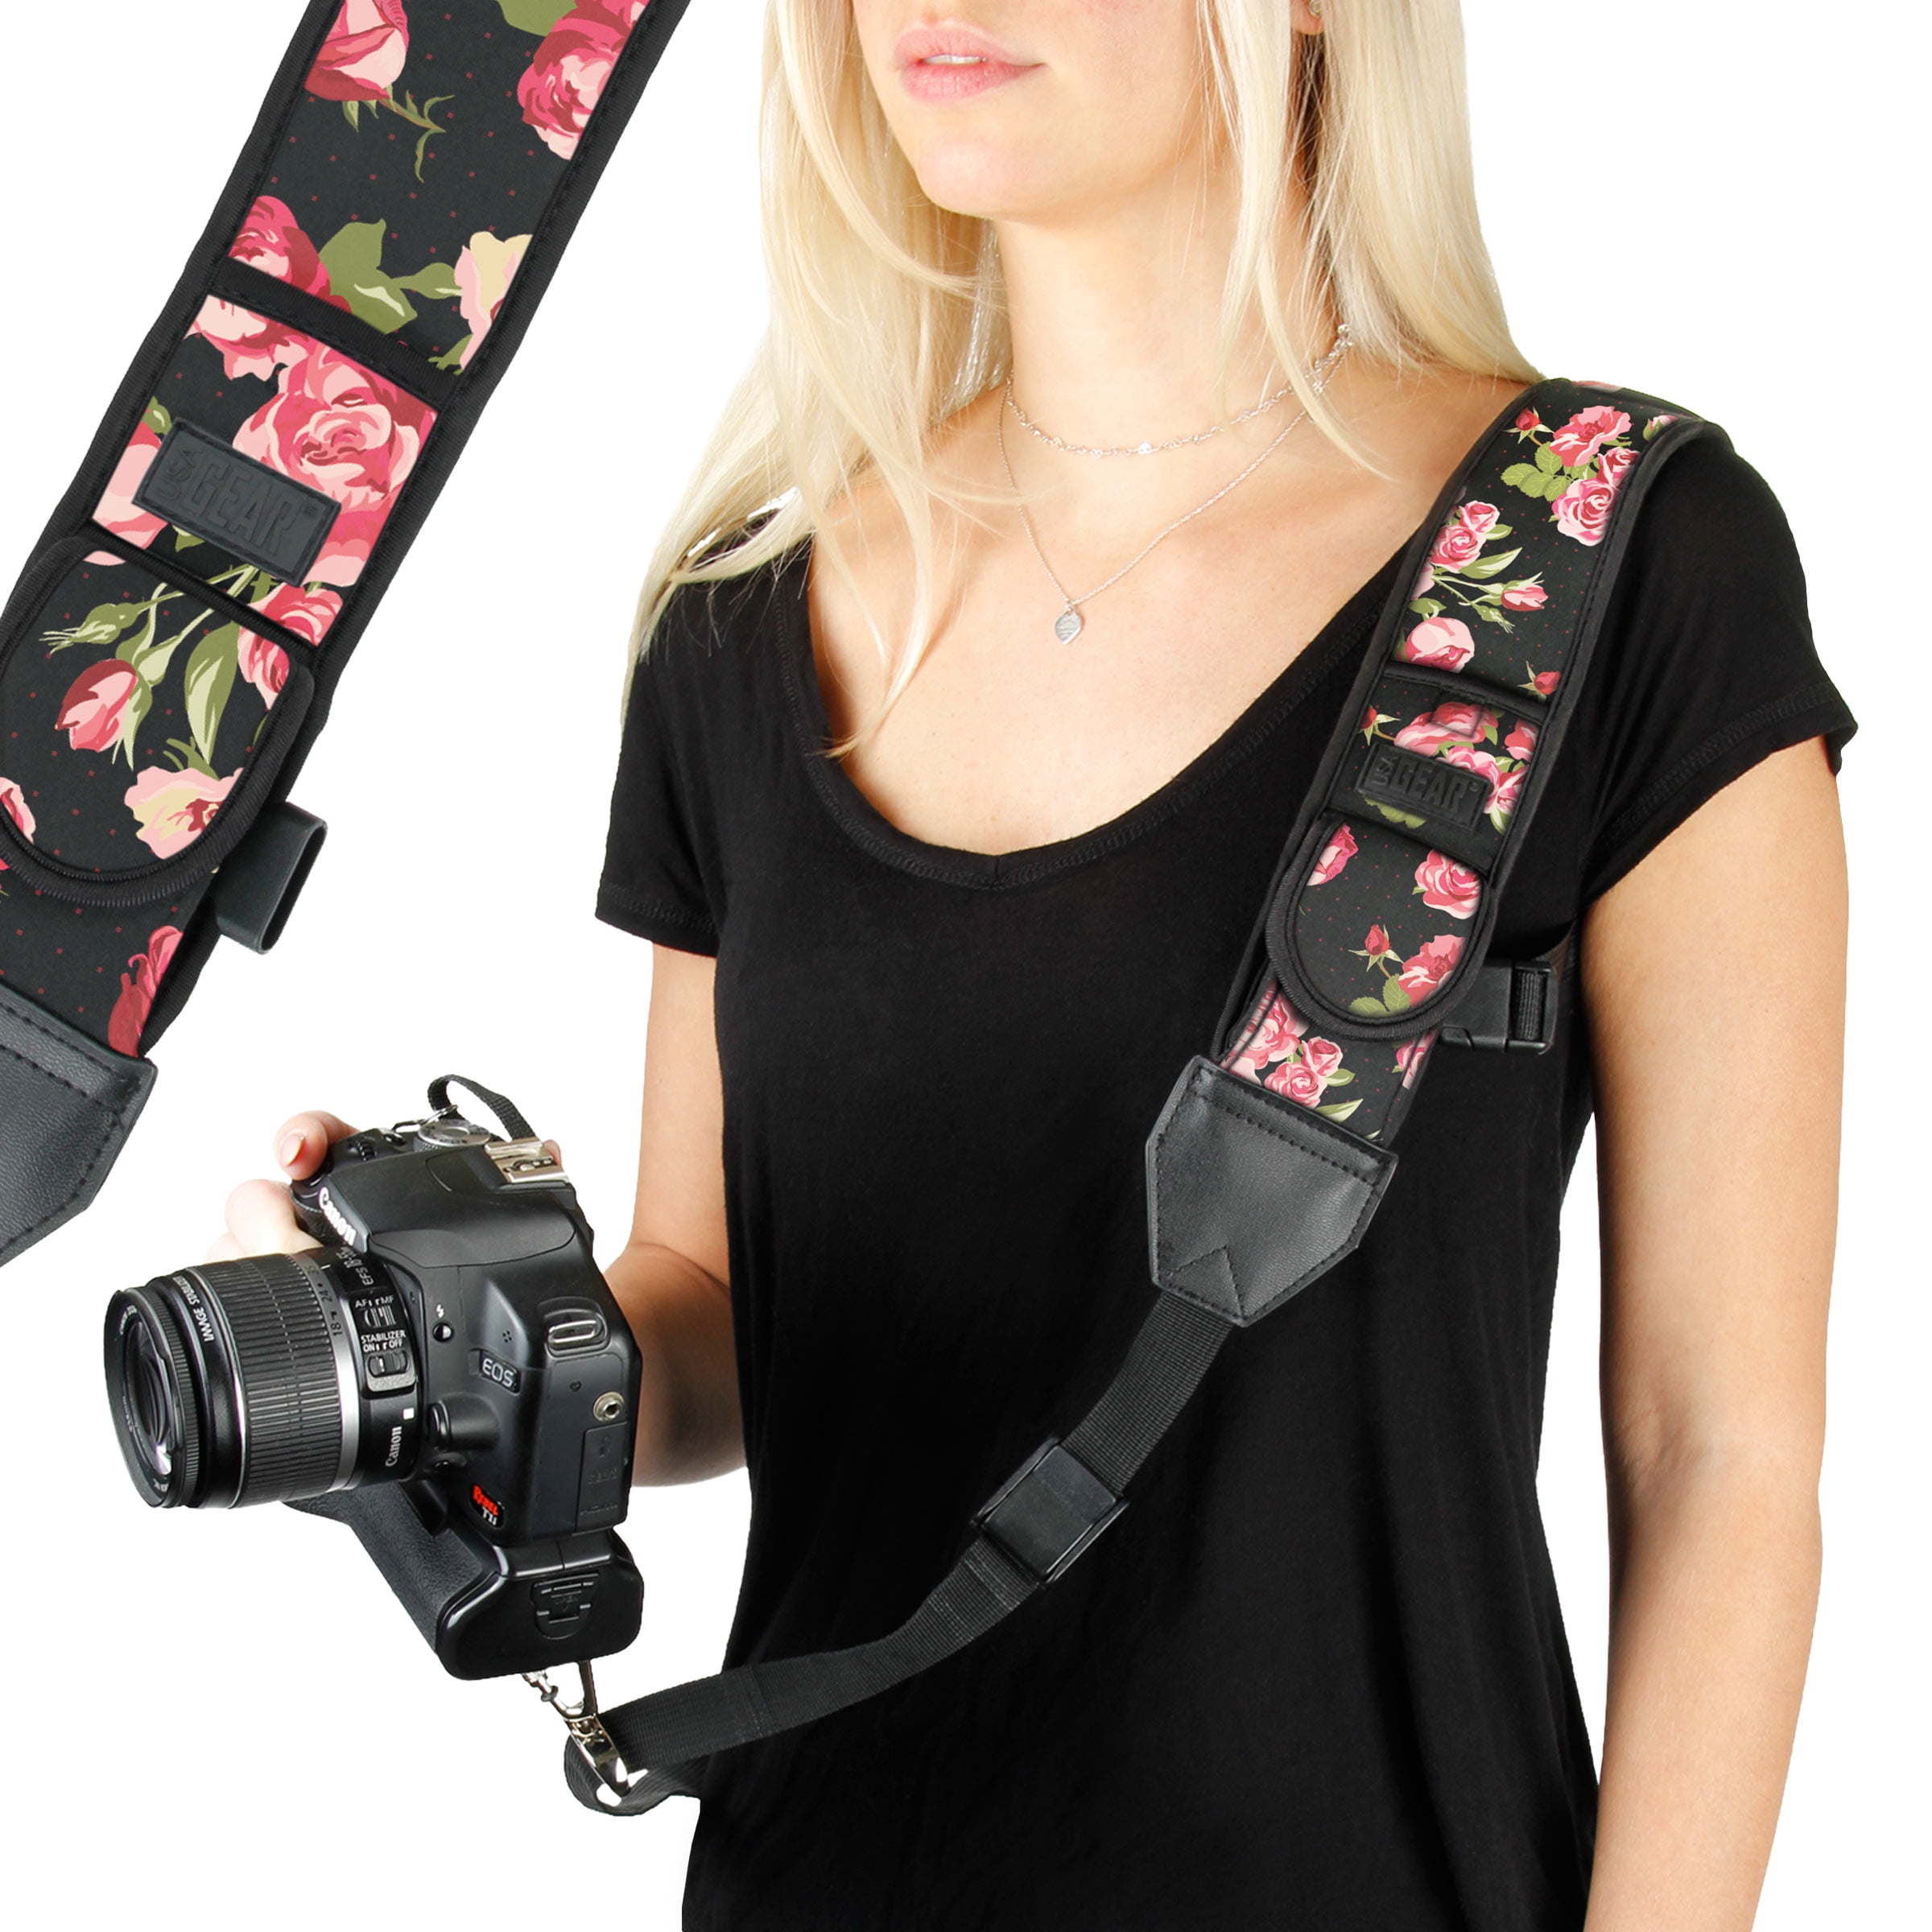 Compatible with Canon Quick Release Buckles and Accessory Storage Pockets Instant Cameras Nikon USA Gear DLSR Camera Strap Shoulder Neck with Polka Dot Neoprene Padding Sony and More Mirrorless